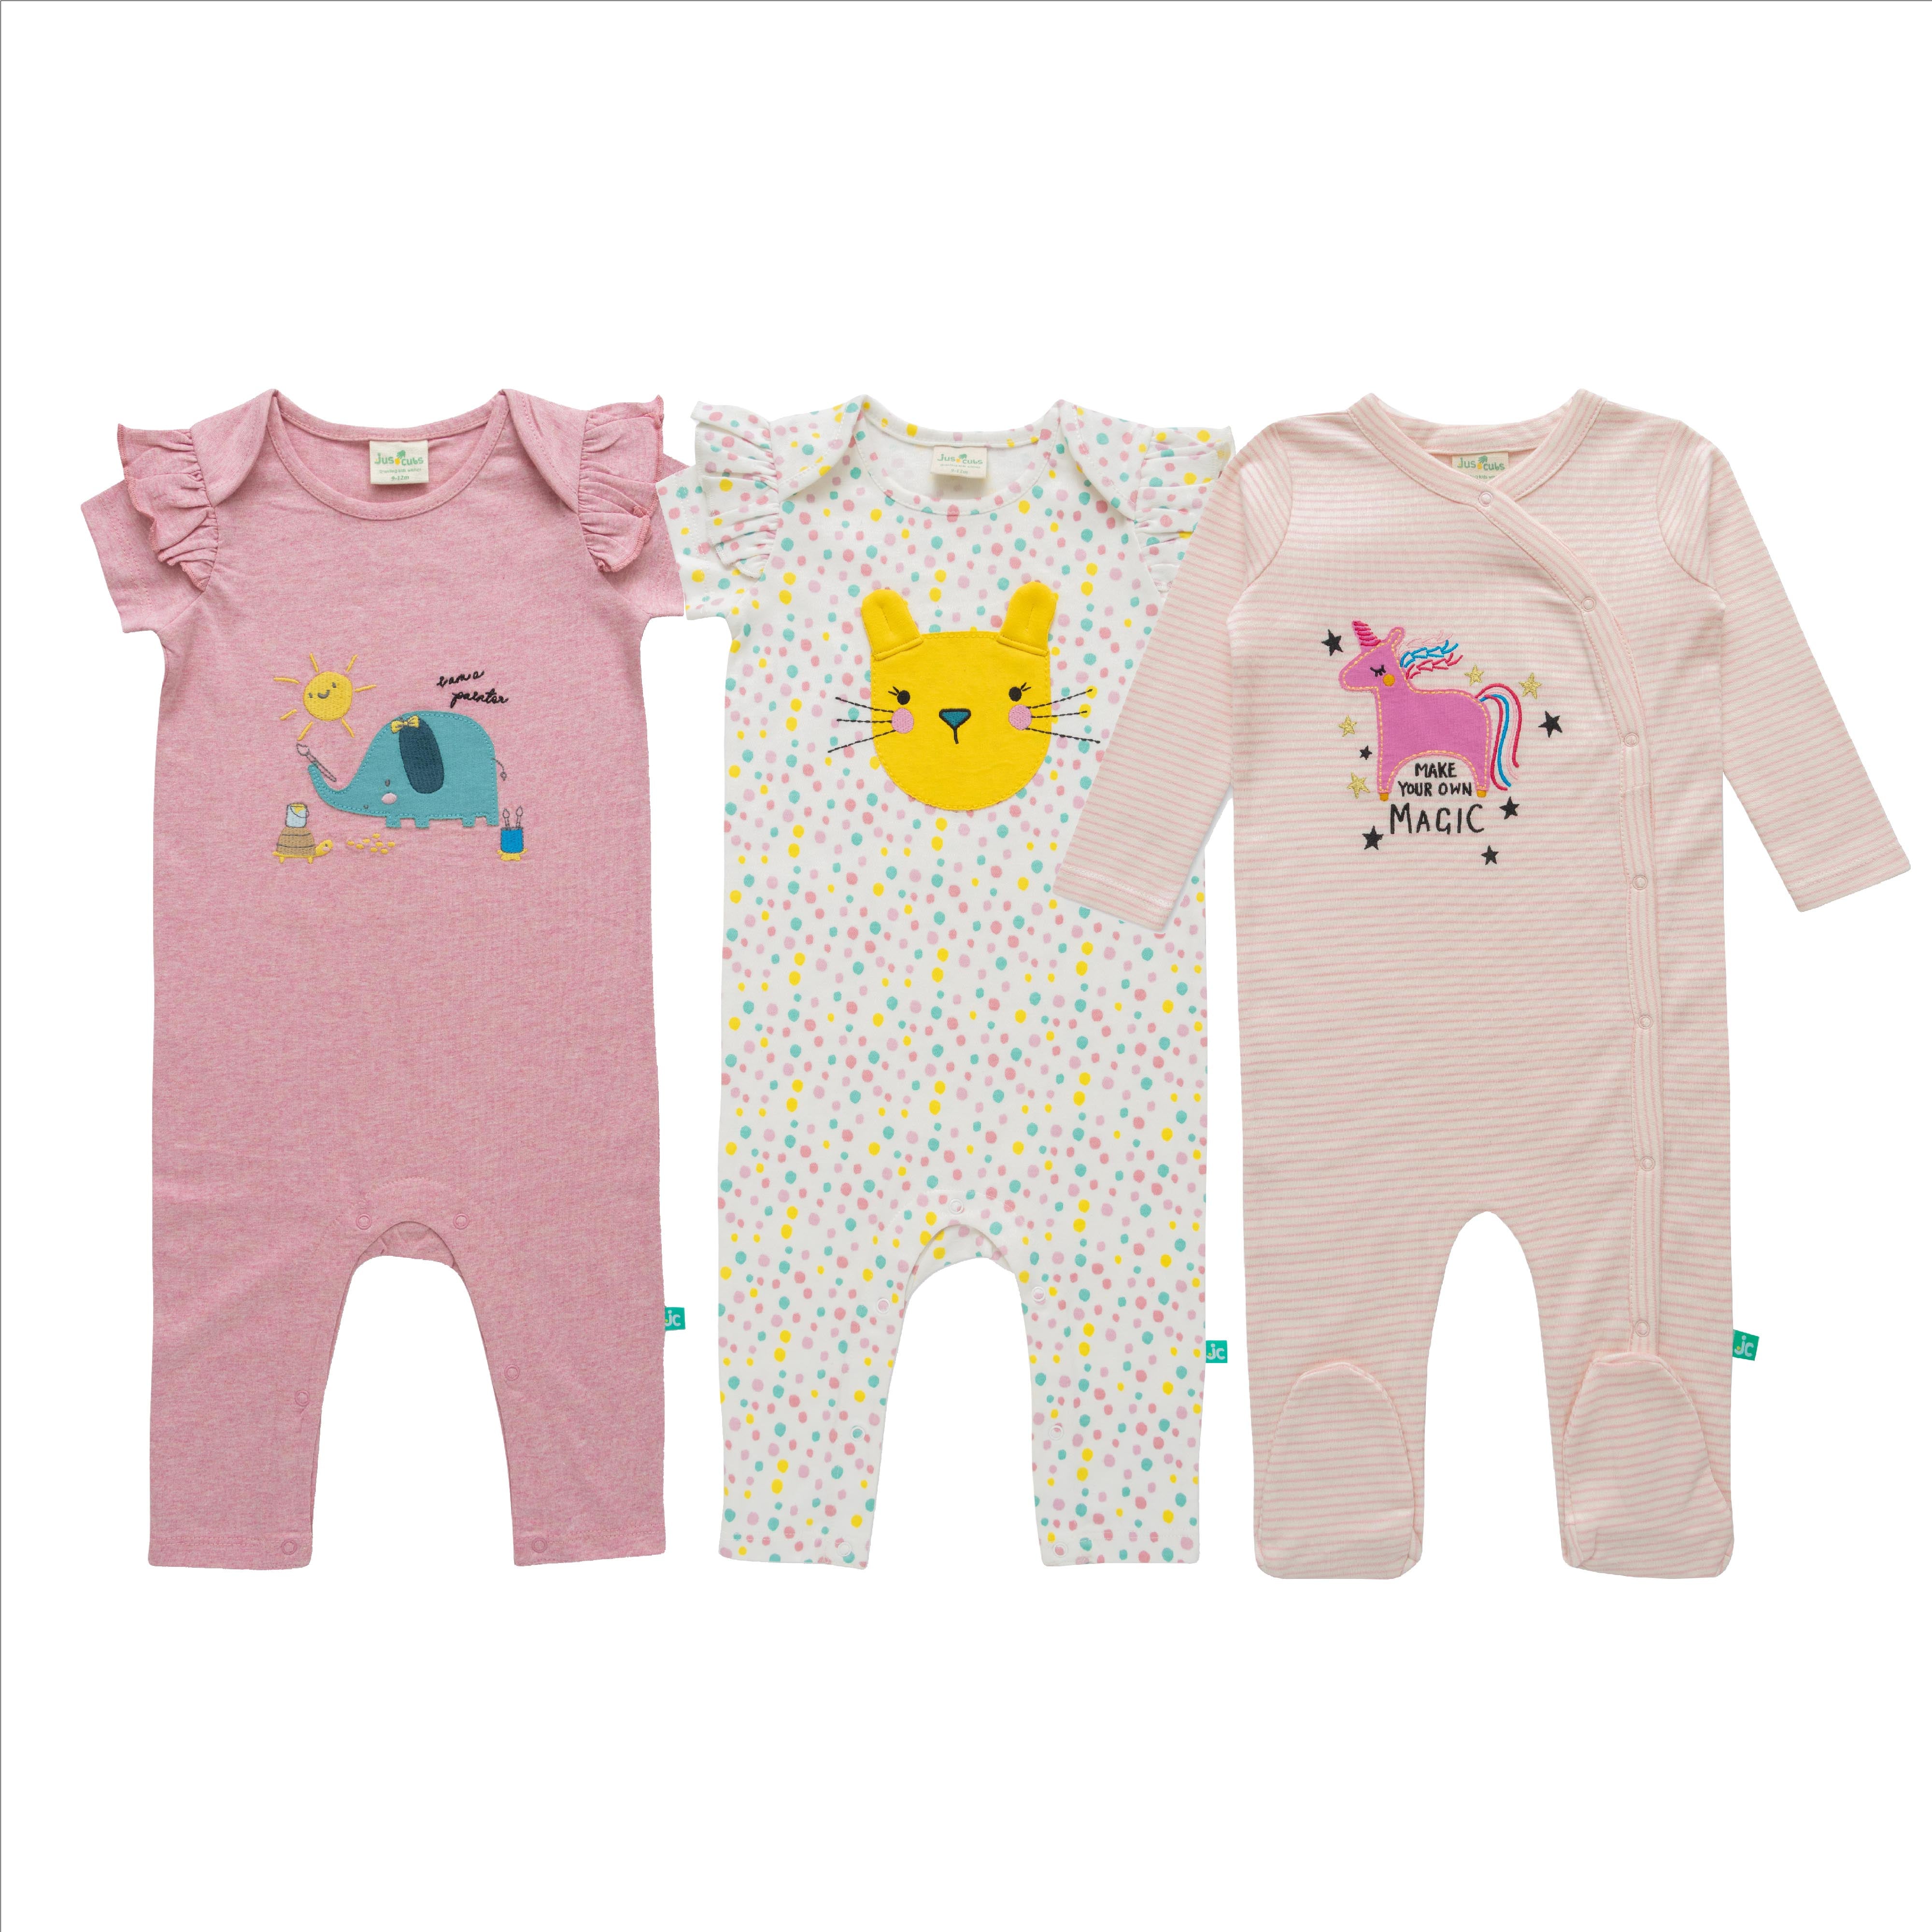 Girls New Born Graphic Printed Romper - Multicolor (Pack of 3)